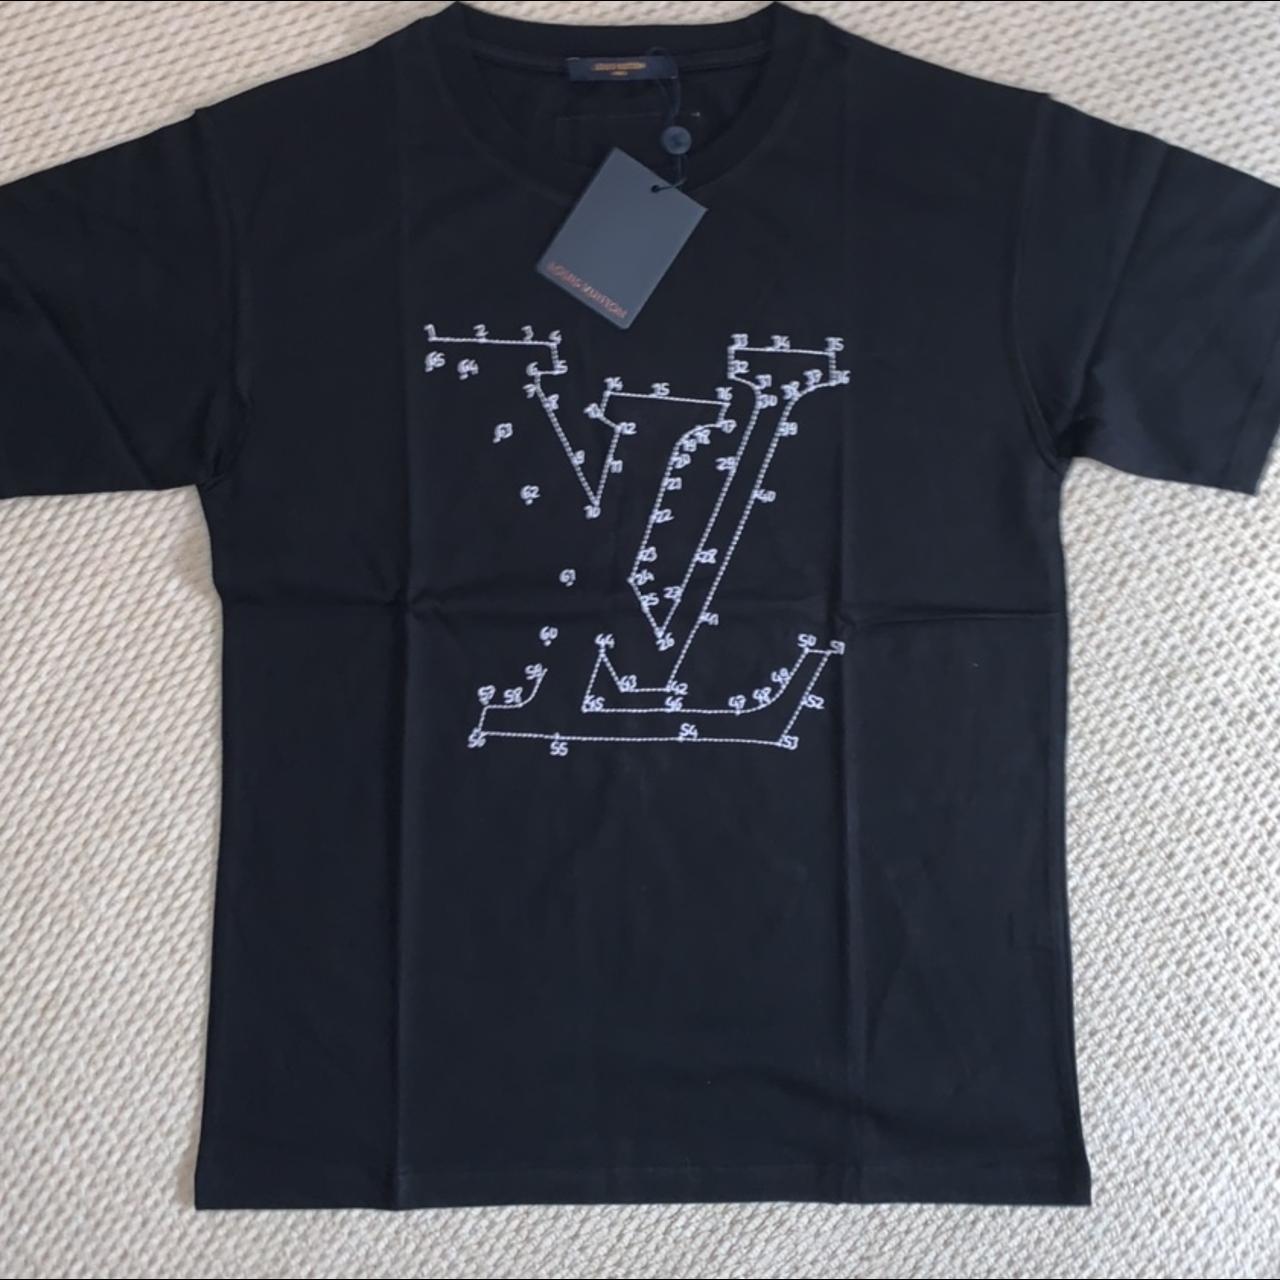 LV STITCH PRINT AND EMBROIDERED T-SHIRT RRP: - Depop